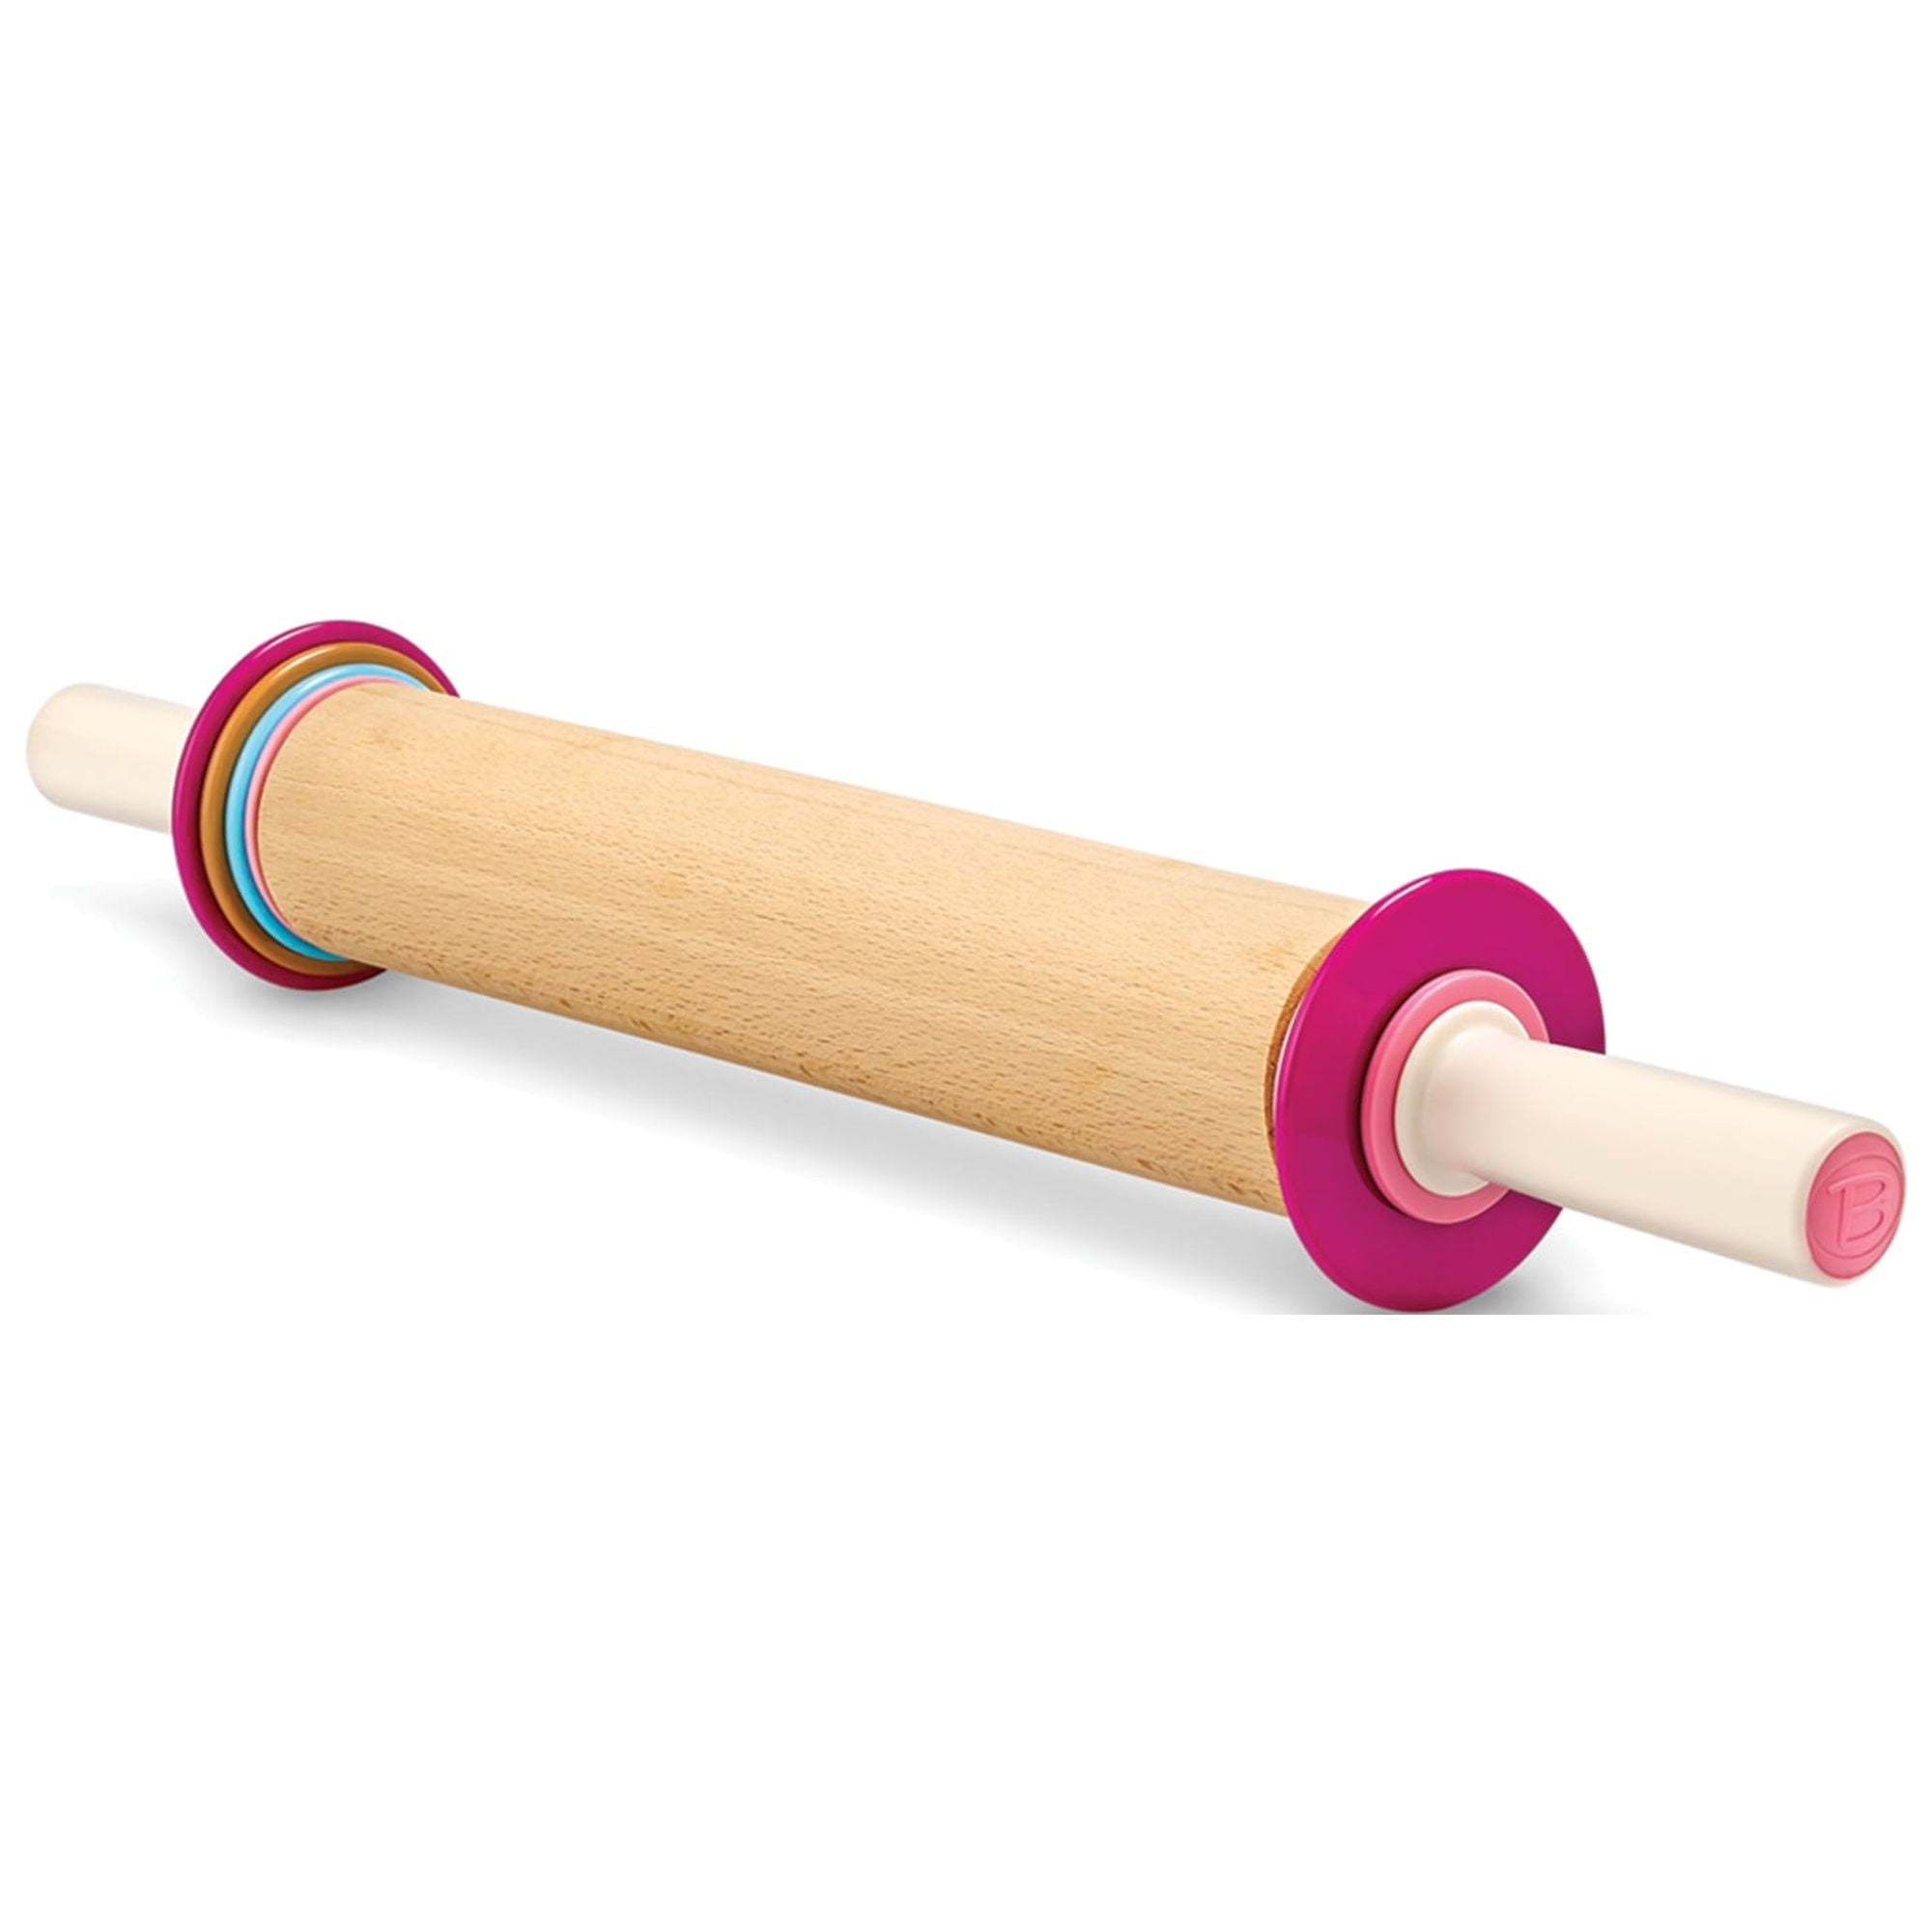 Discounted rolling pins